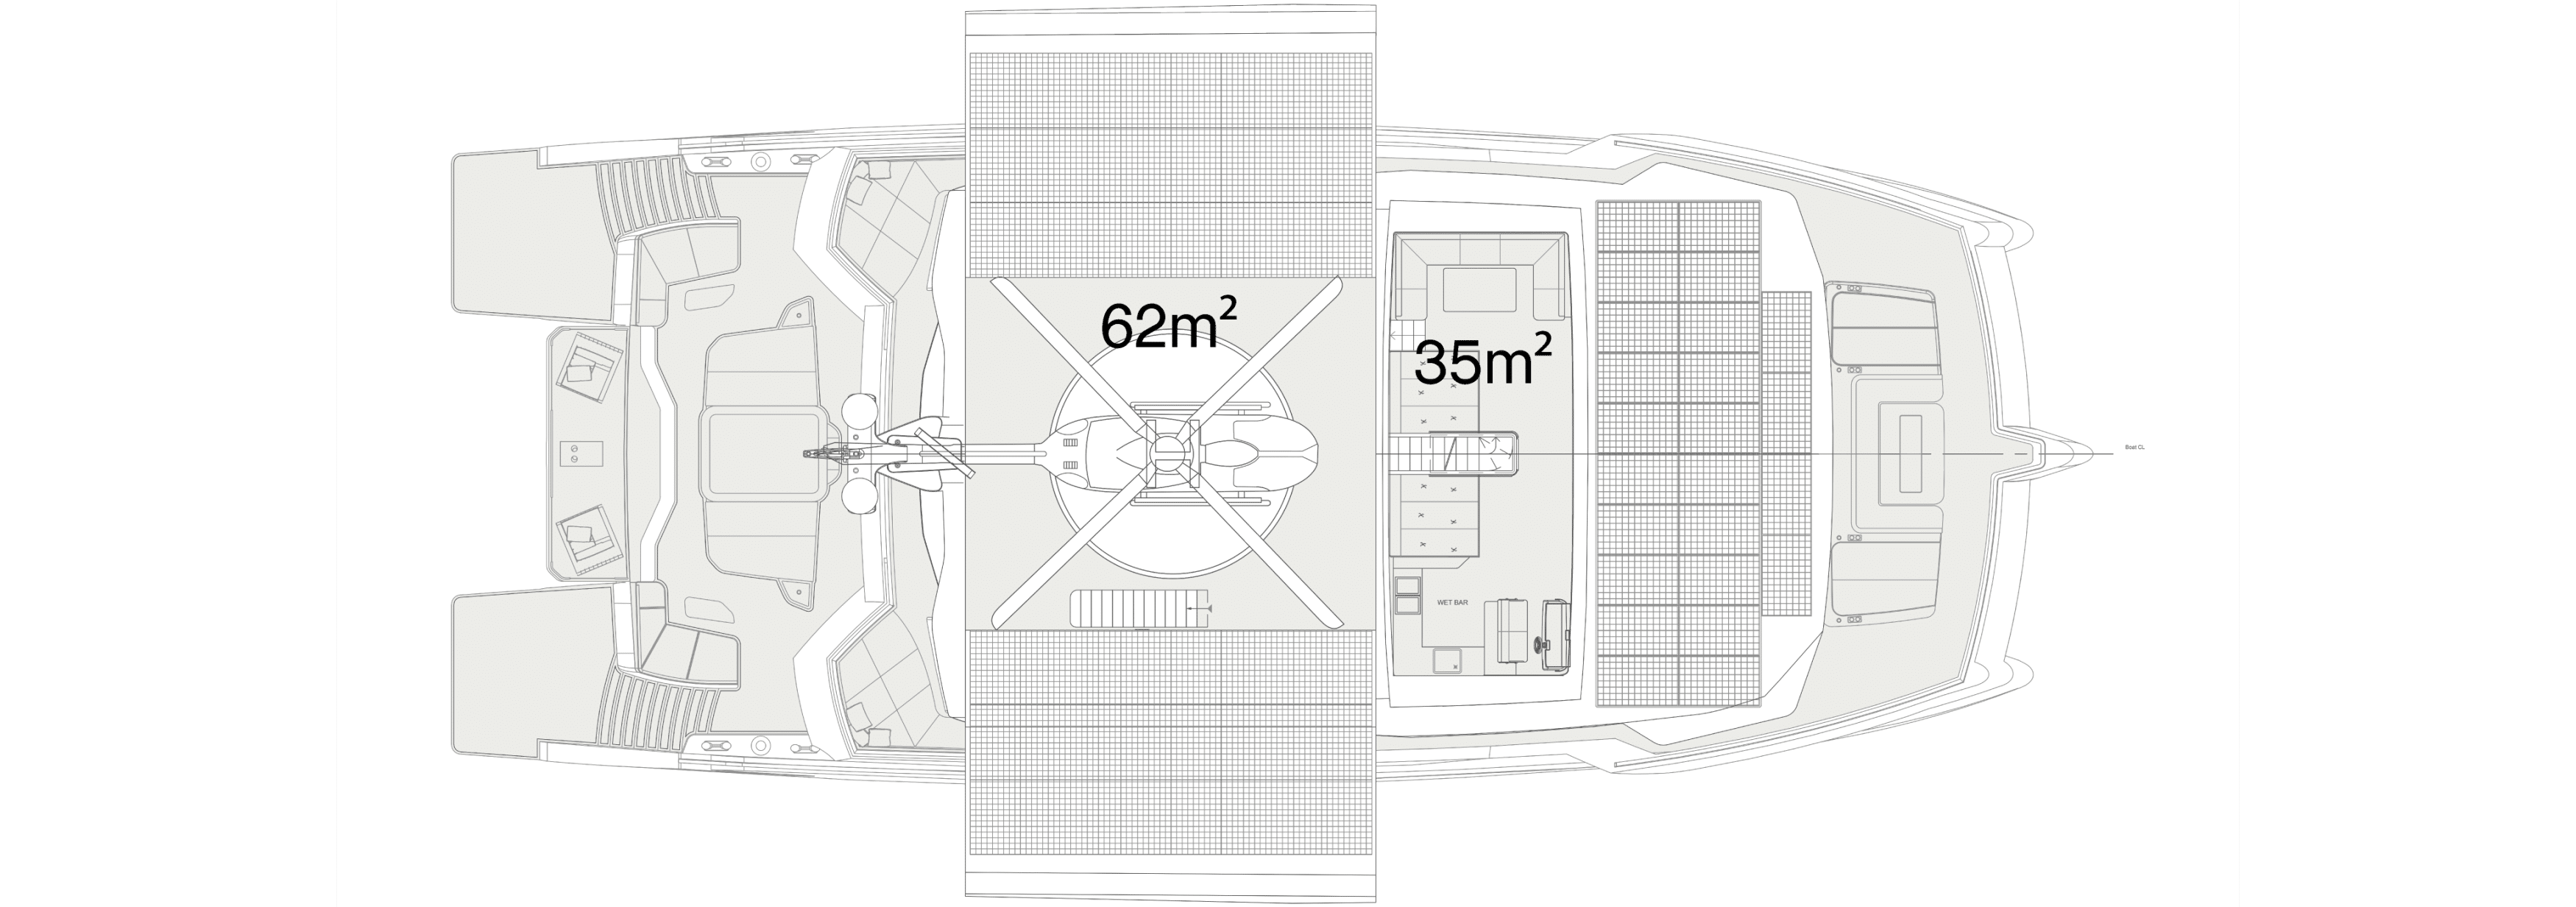 flybrifge helipad plan of a Silent 120 yacht with mesures